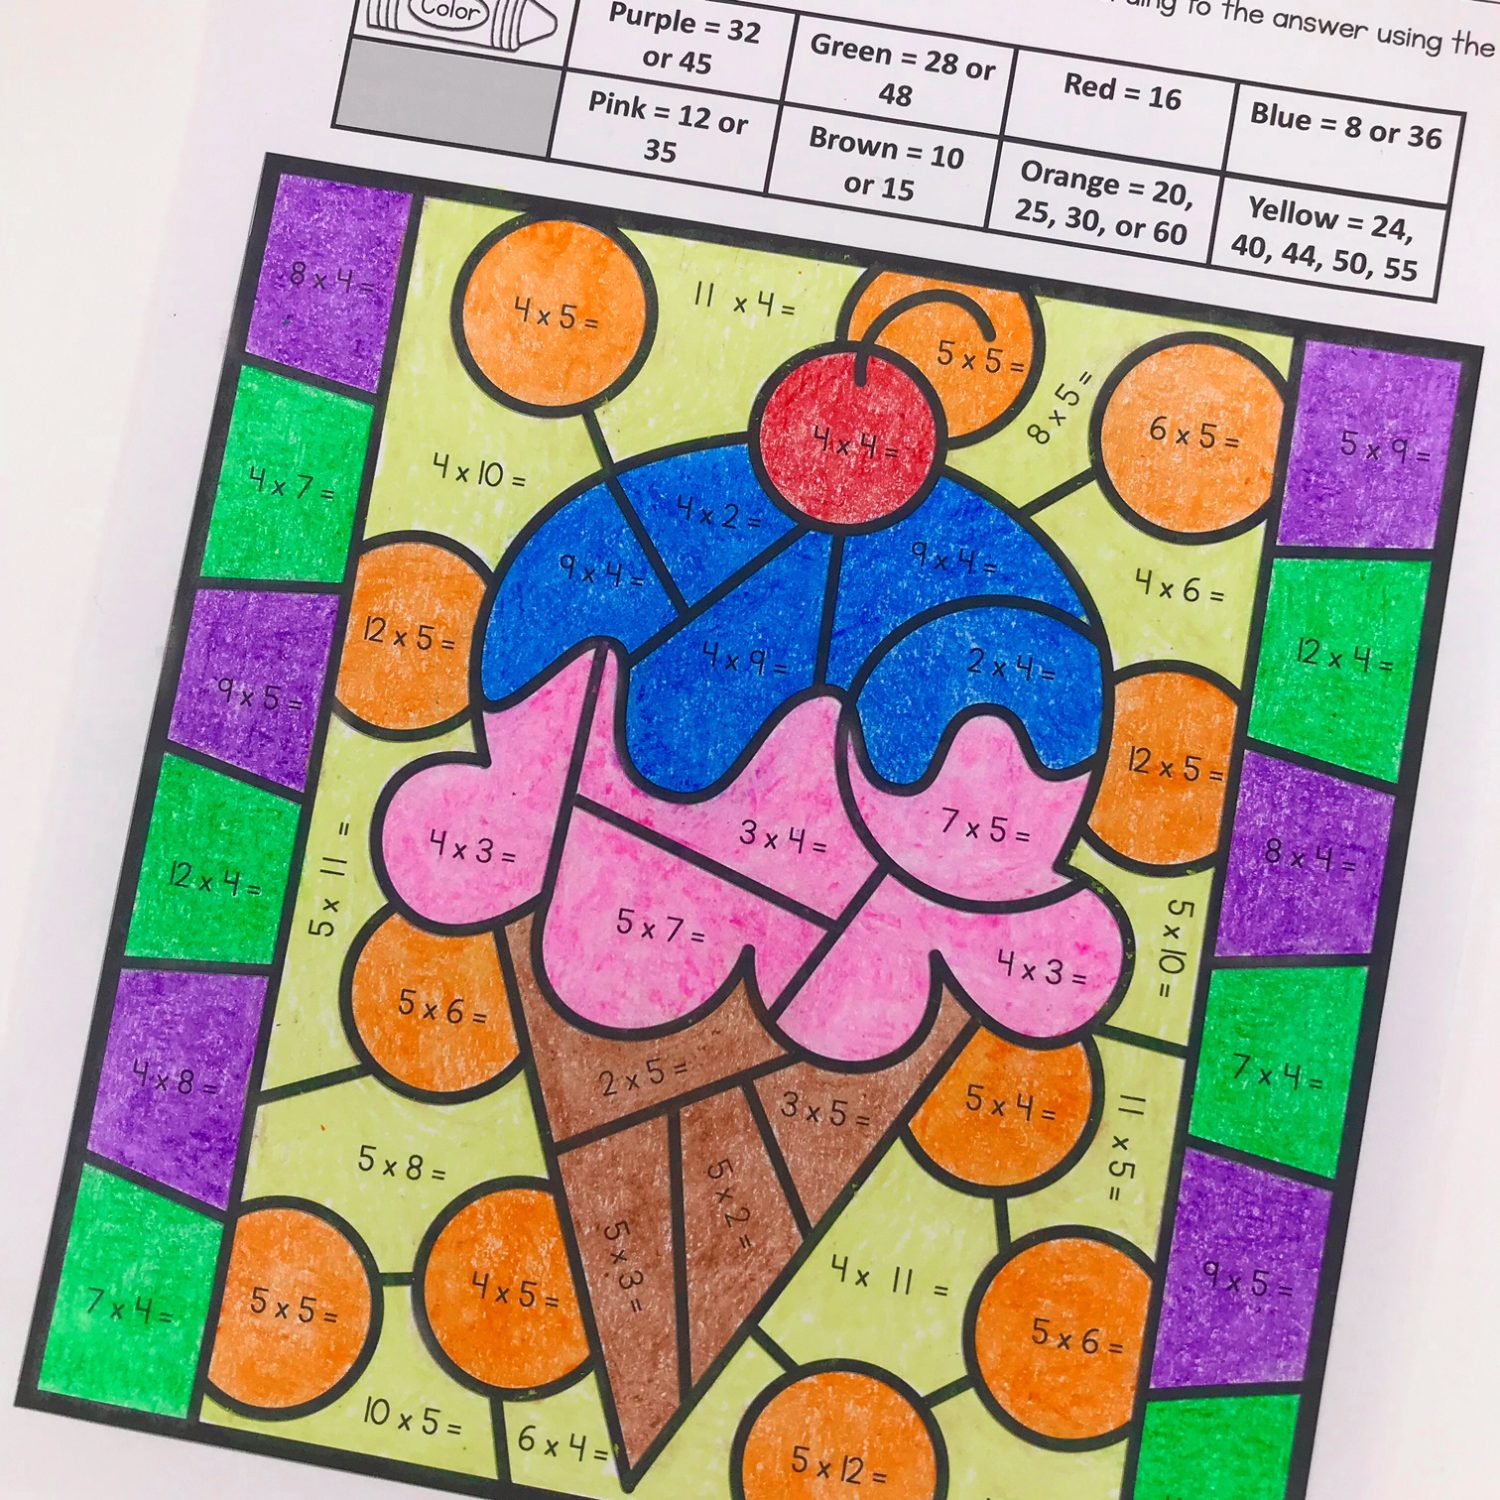 Color by number picture with multiplication facts. The picture is an ice cream cone with a cherry on top.